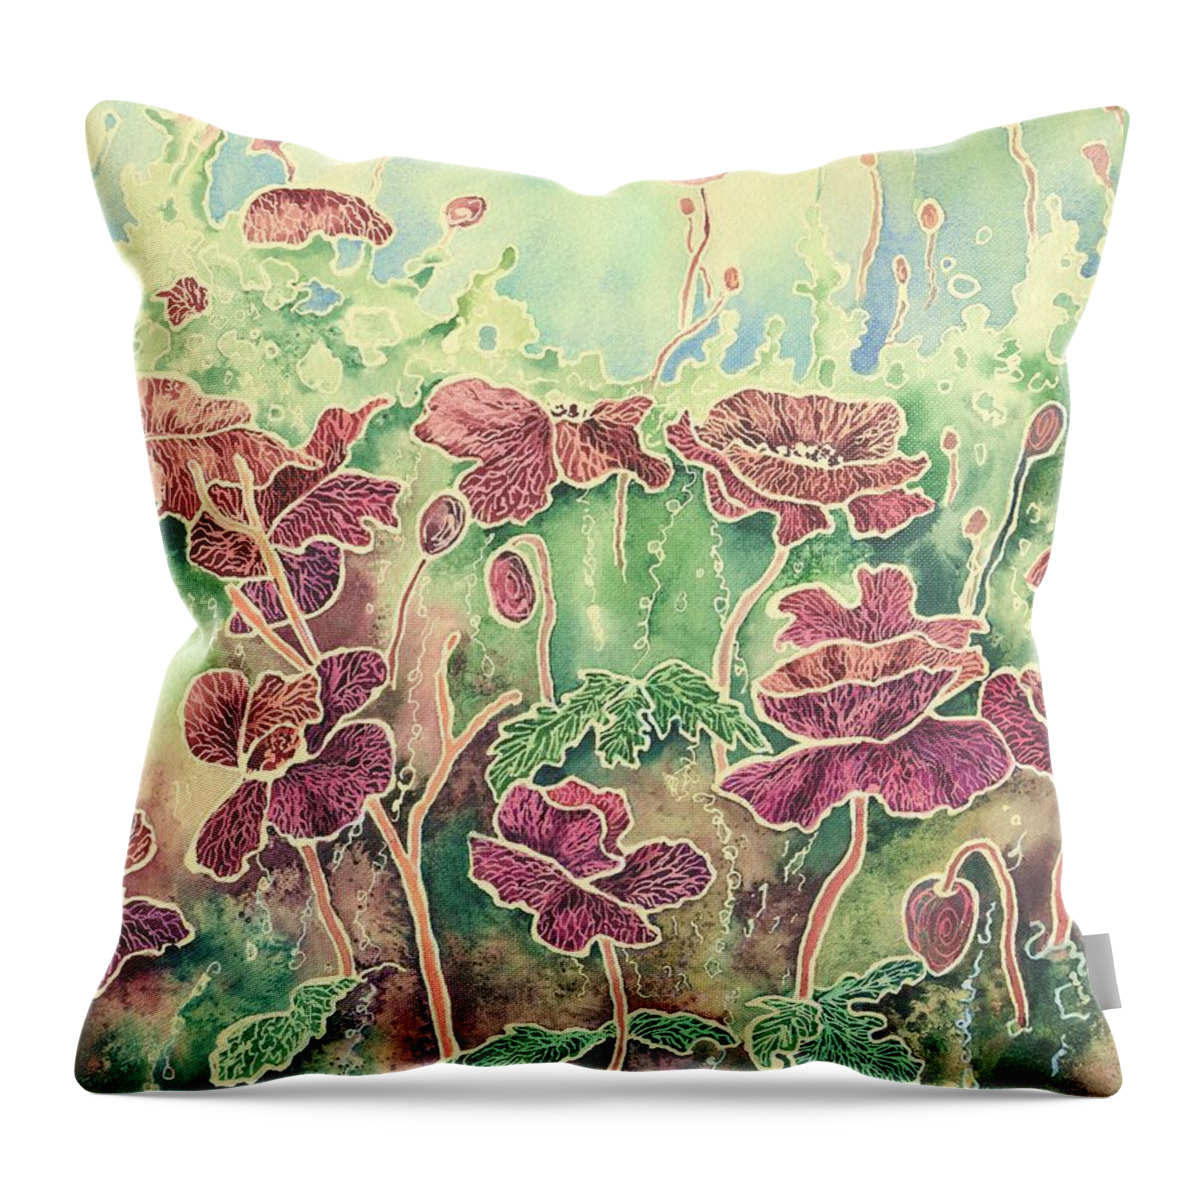 Poppies Throw Pillow featuring the painting Sea Poppies by Lynne Henderson